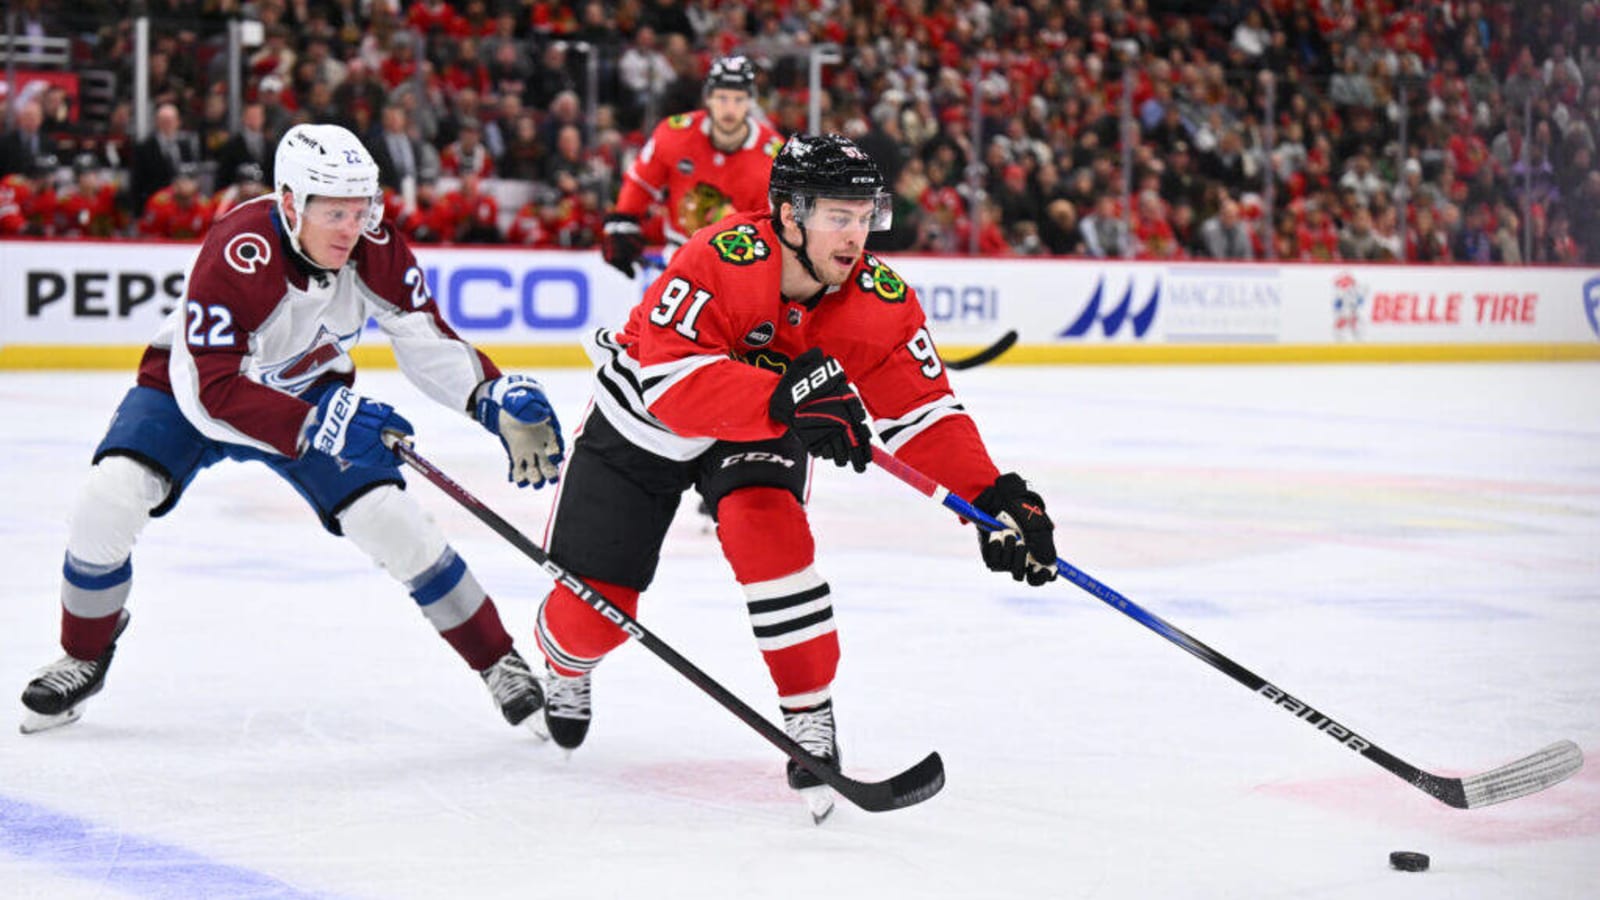 How to watch Blackhawks vs Avalanche for free in live streaming: NHL online, preview, start time, and TV channel